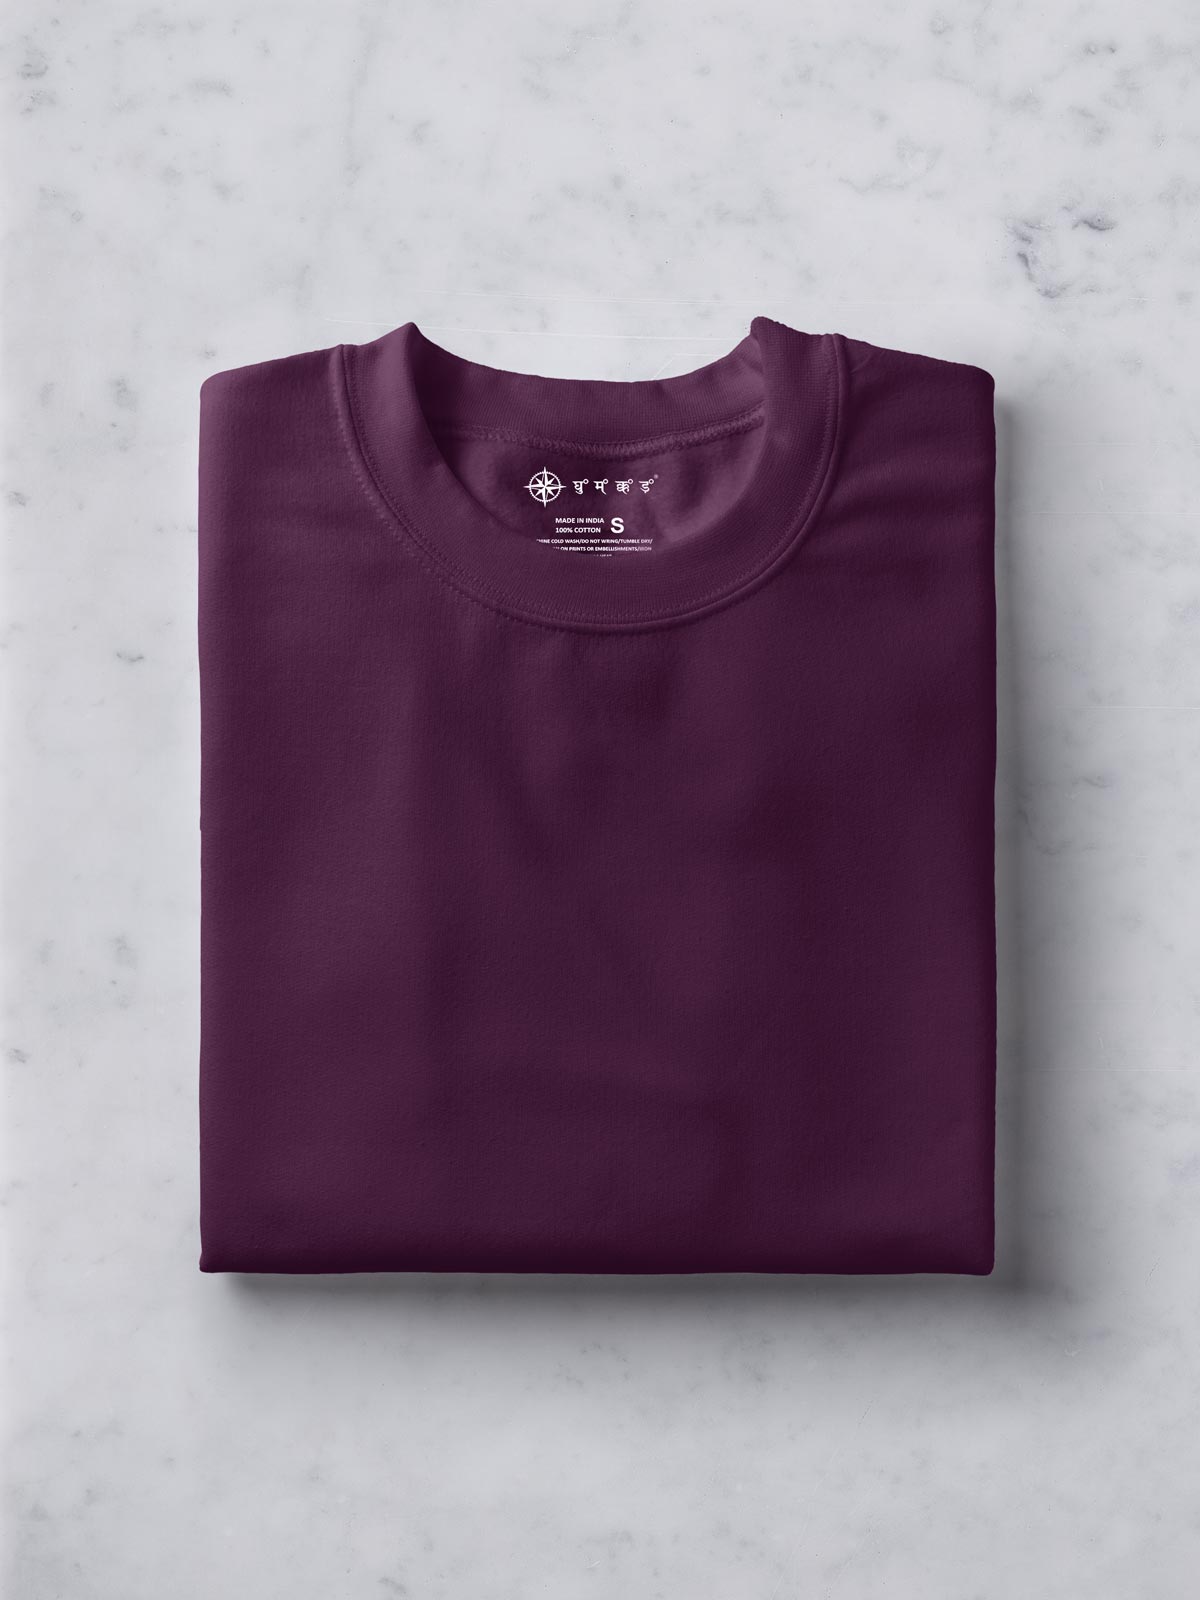 Wine-t-shirt-for-men by Ghumakkad